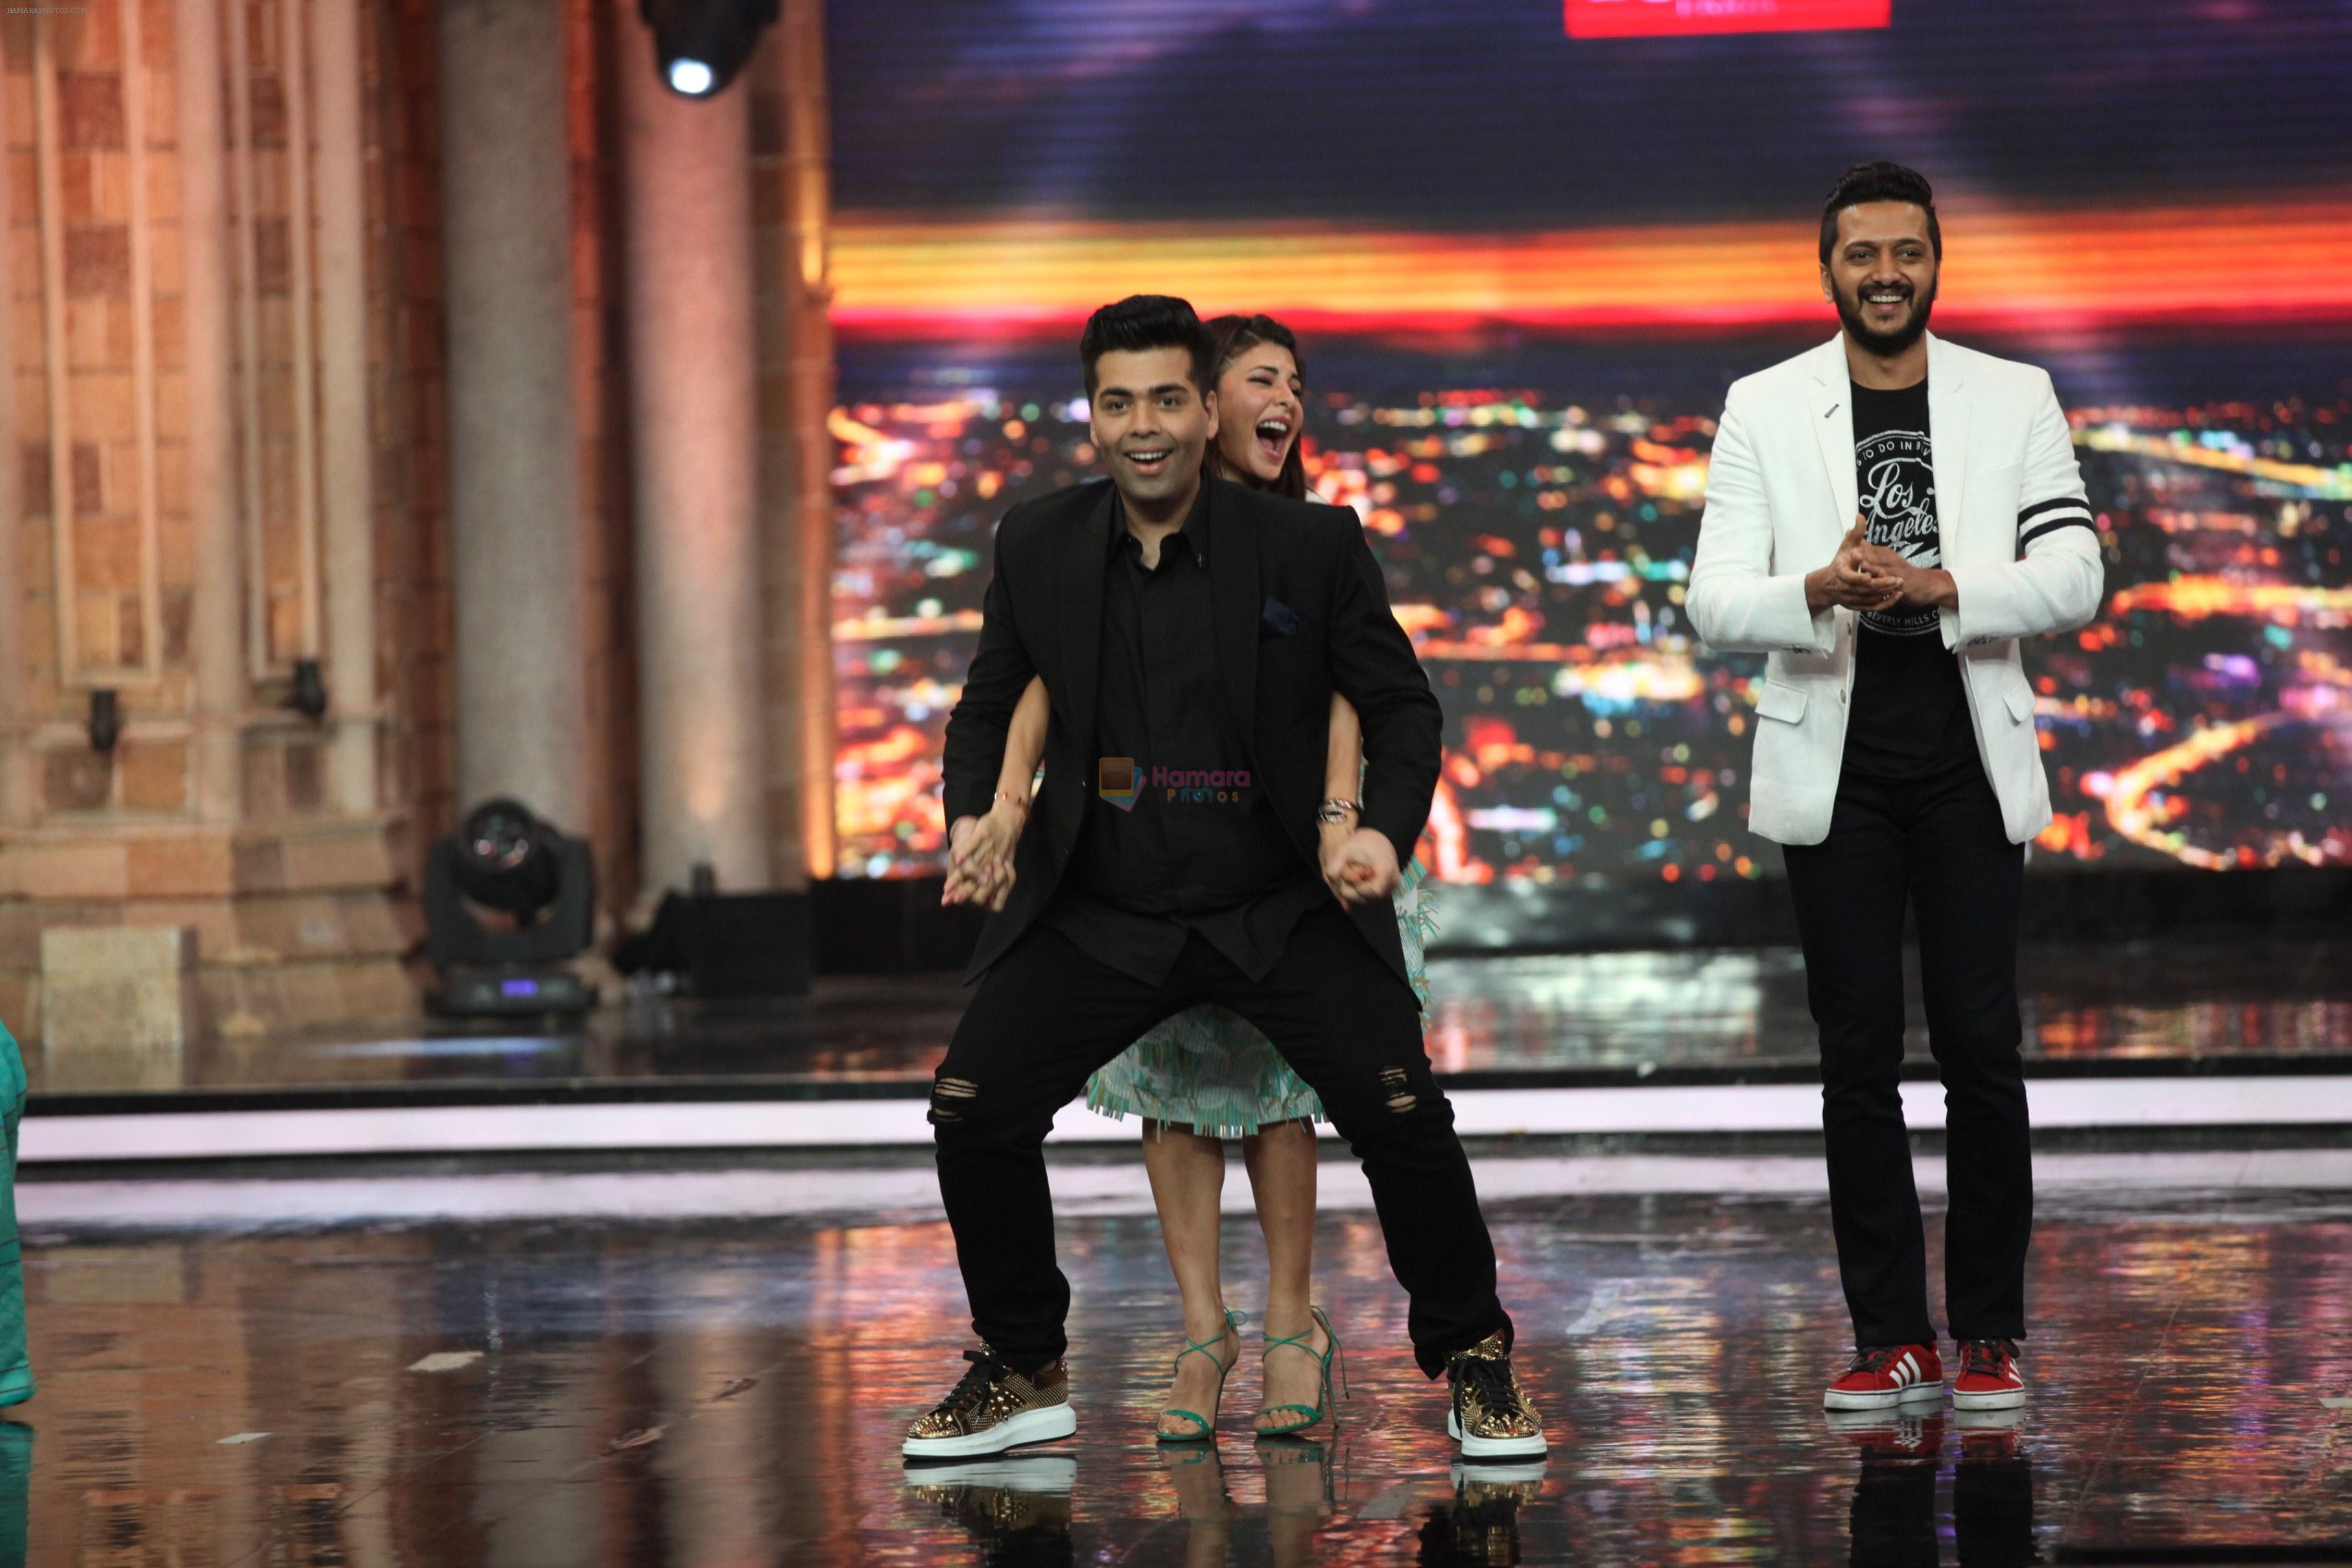 Jacqueline Fernandez, Riteish Deshmukh, Karan Johar at the promotion of Housefull 3 on the sets of India's got Talent in Mumbai on 30th May 2016